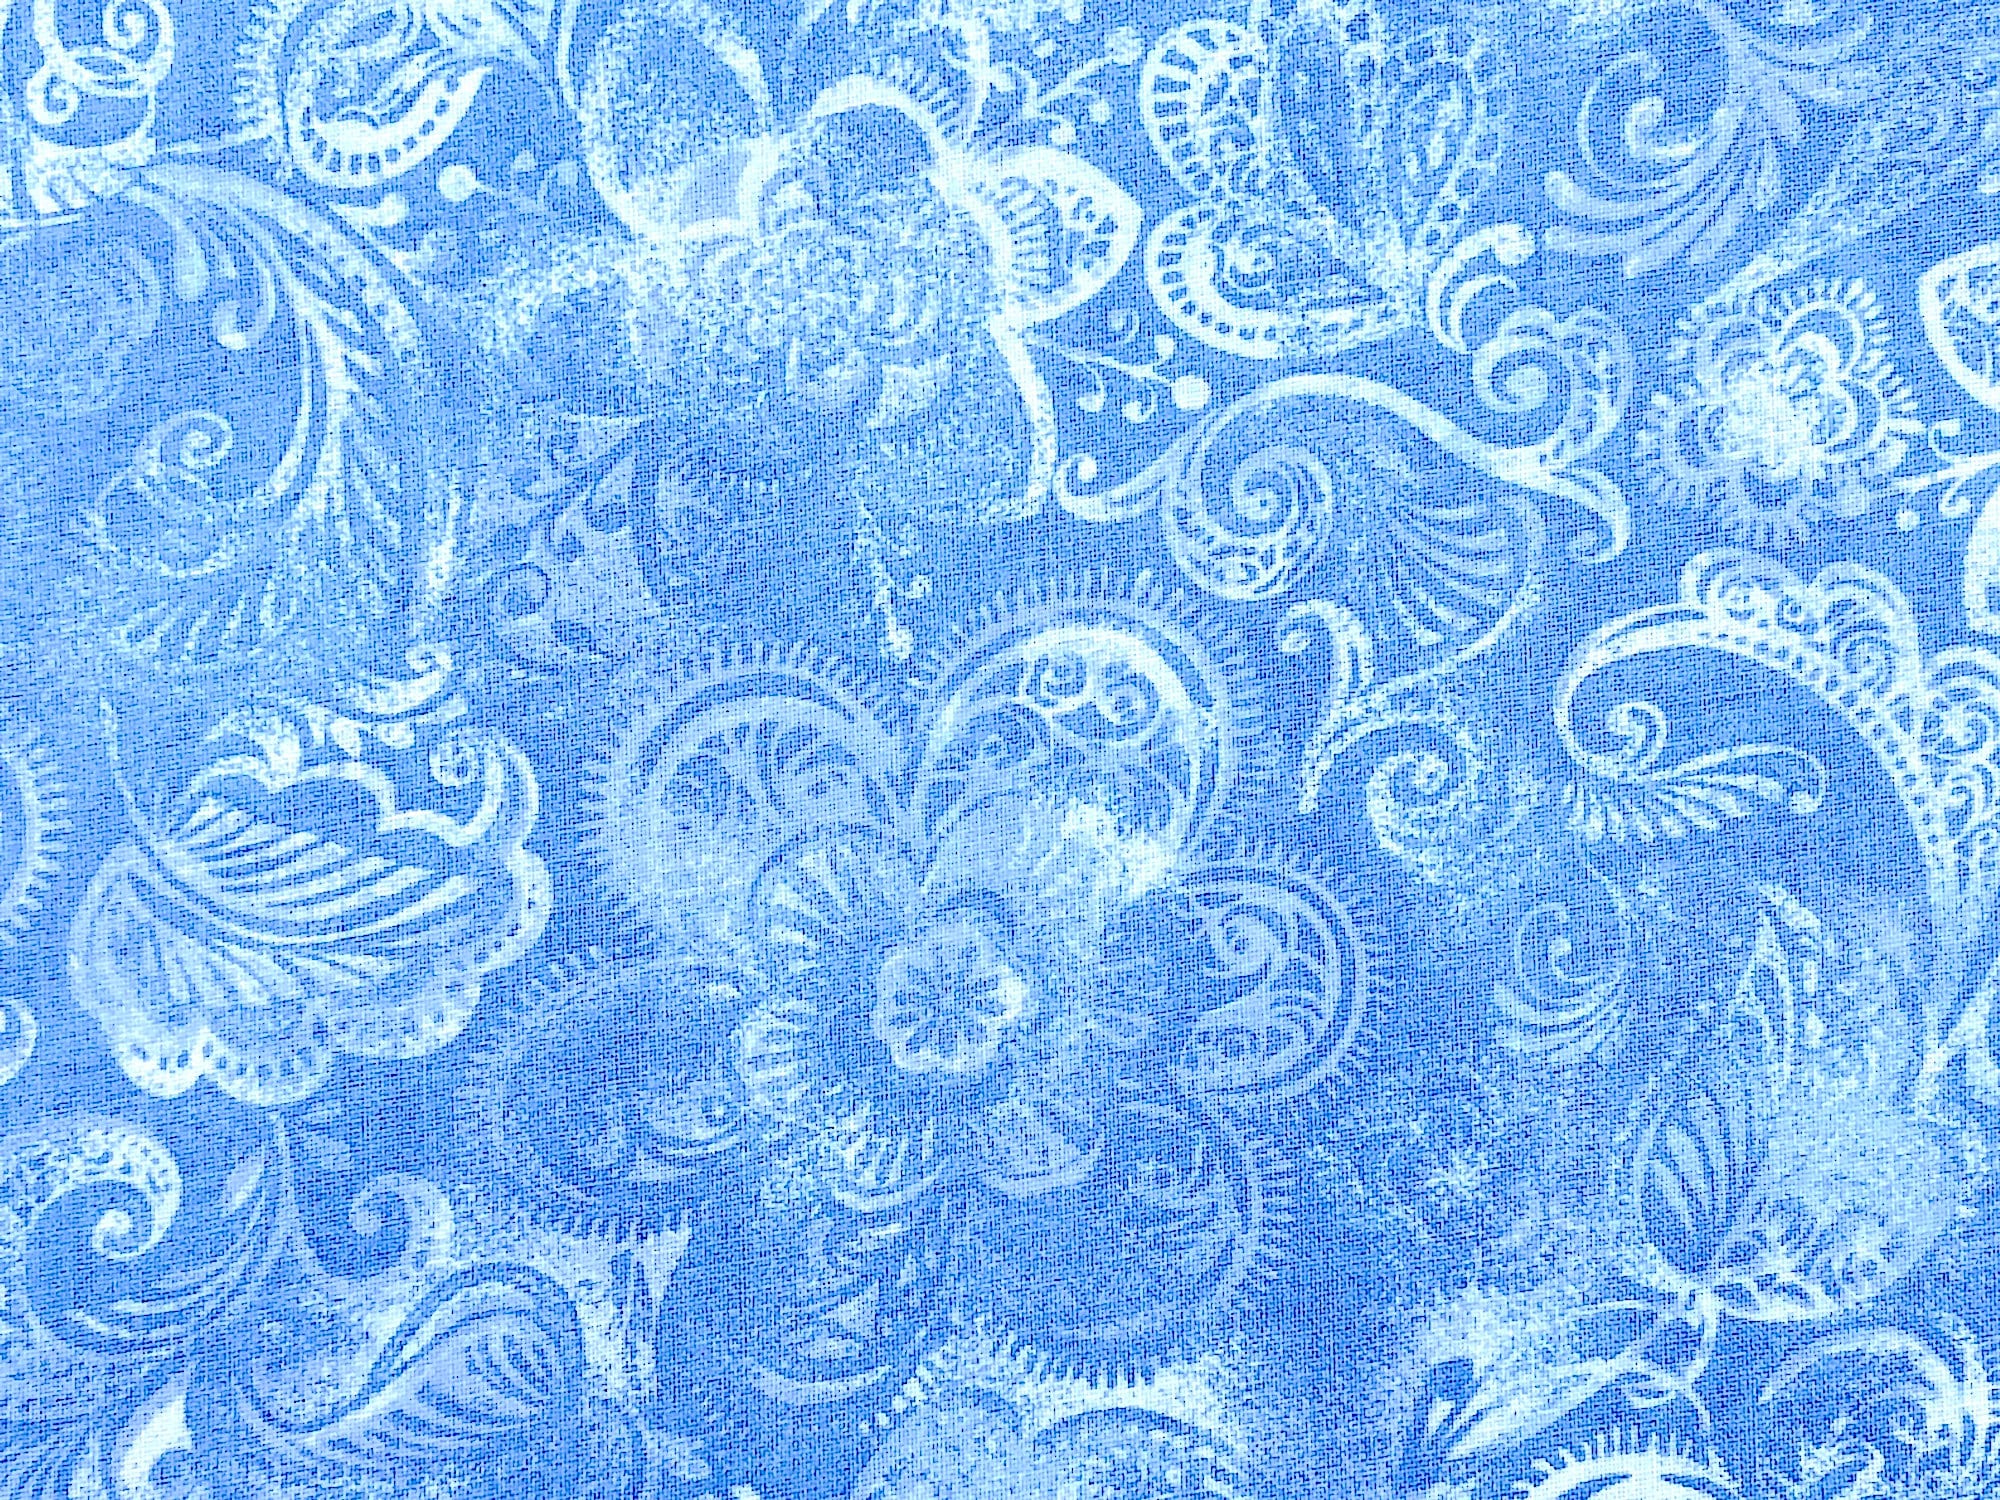 This wide light blue fabric is covered with flower and leaf outlines.